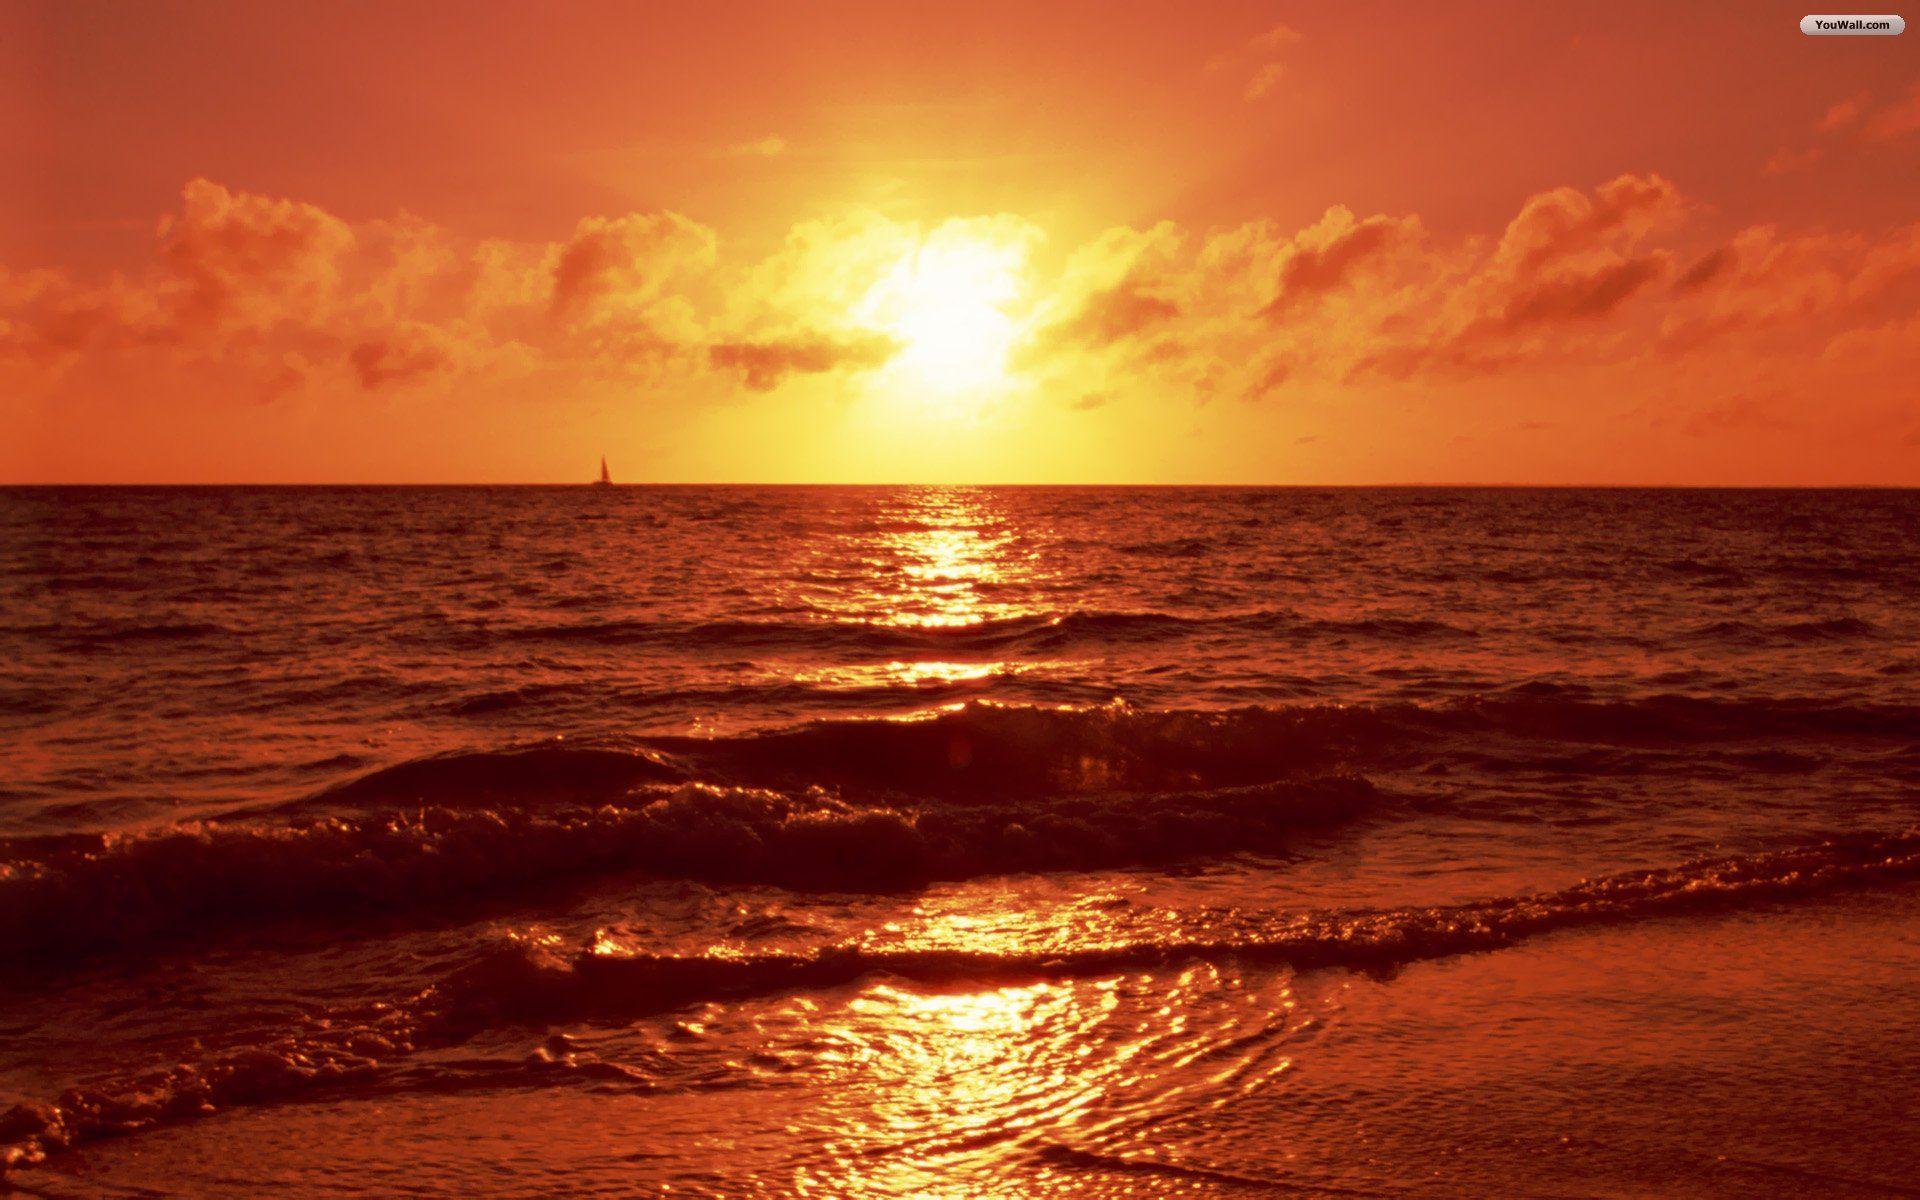 Beach Sunset Wallpapers 21897 Hd Wallpapers in Beach n Tropical